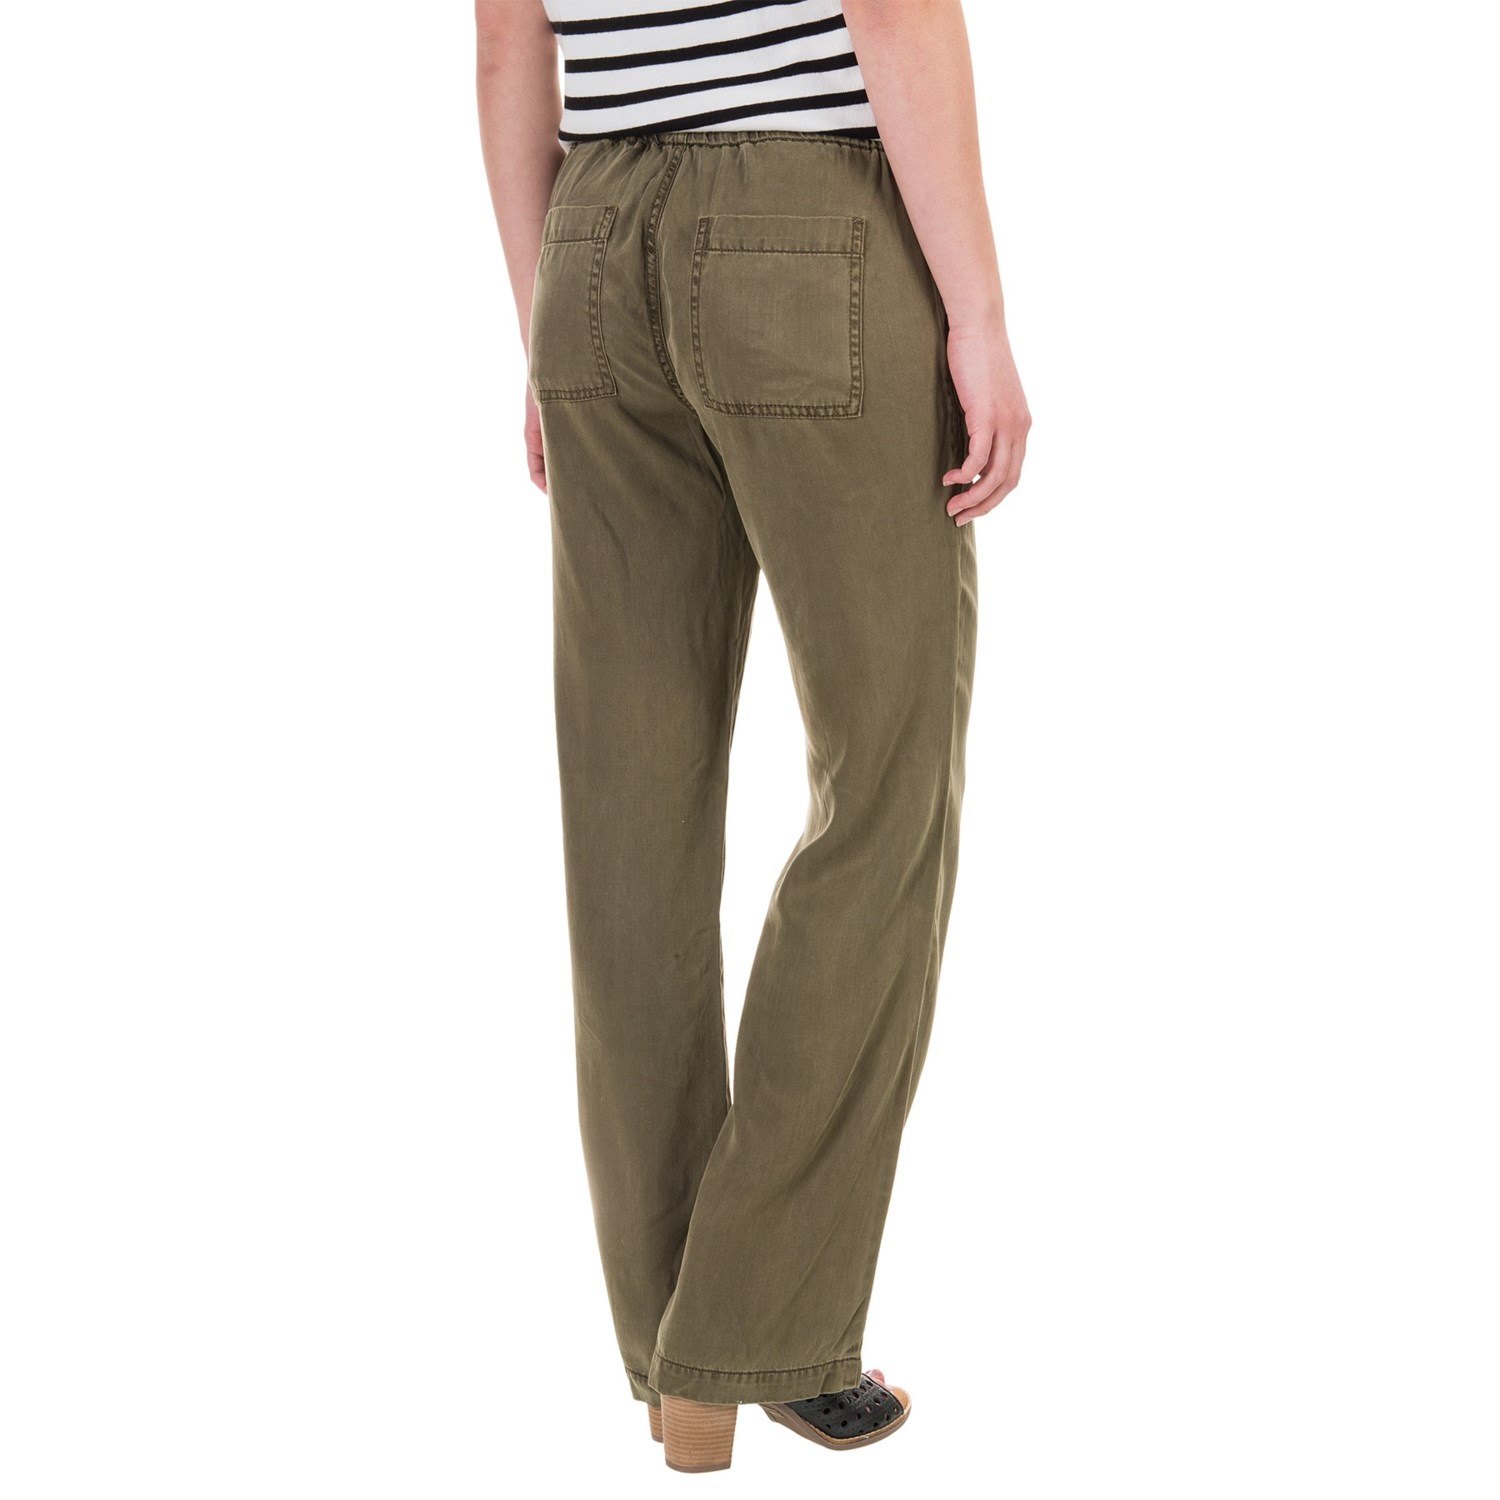 Max Jeans TENCEL® Pants (For Women) - Save 63%